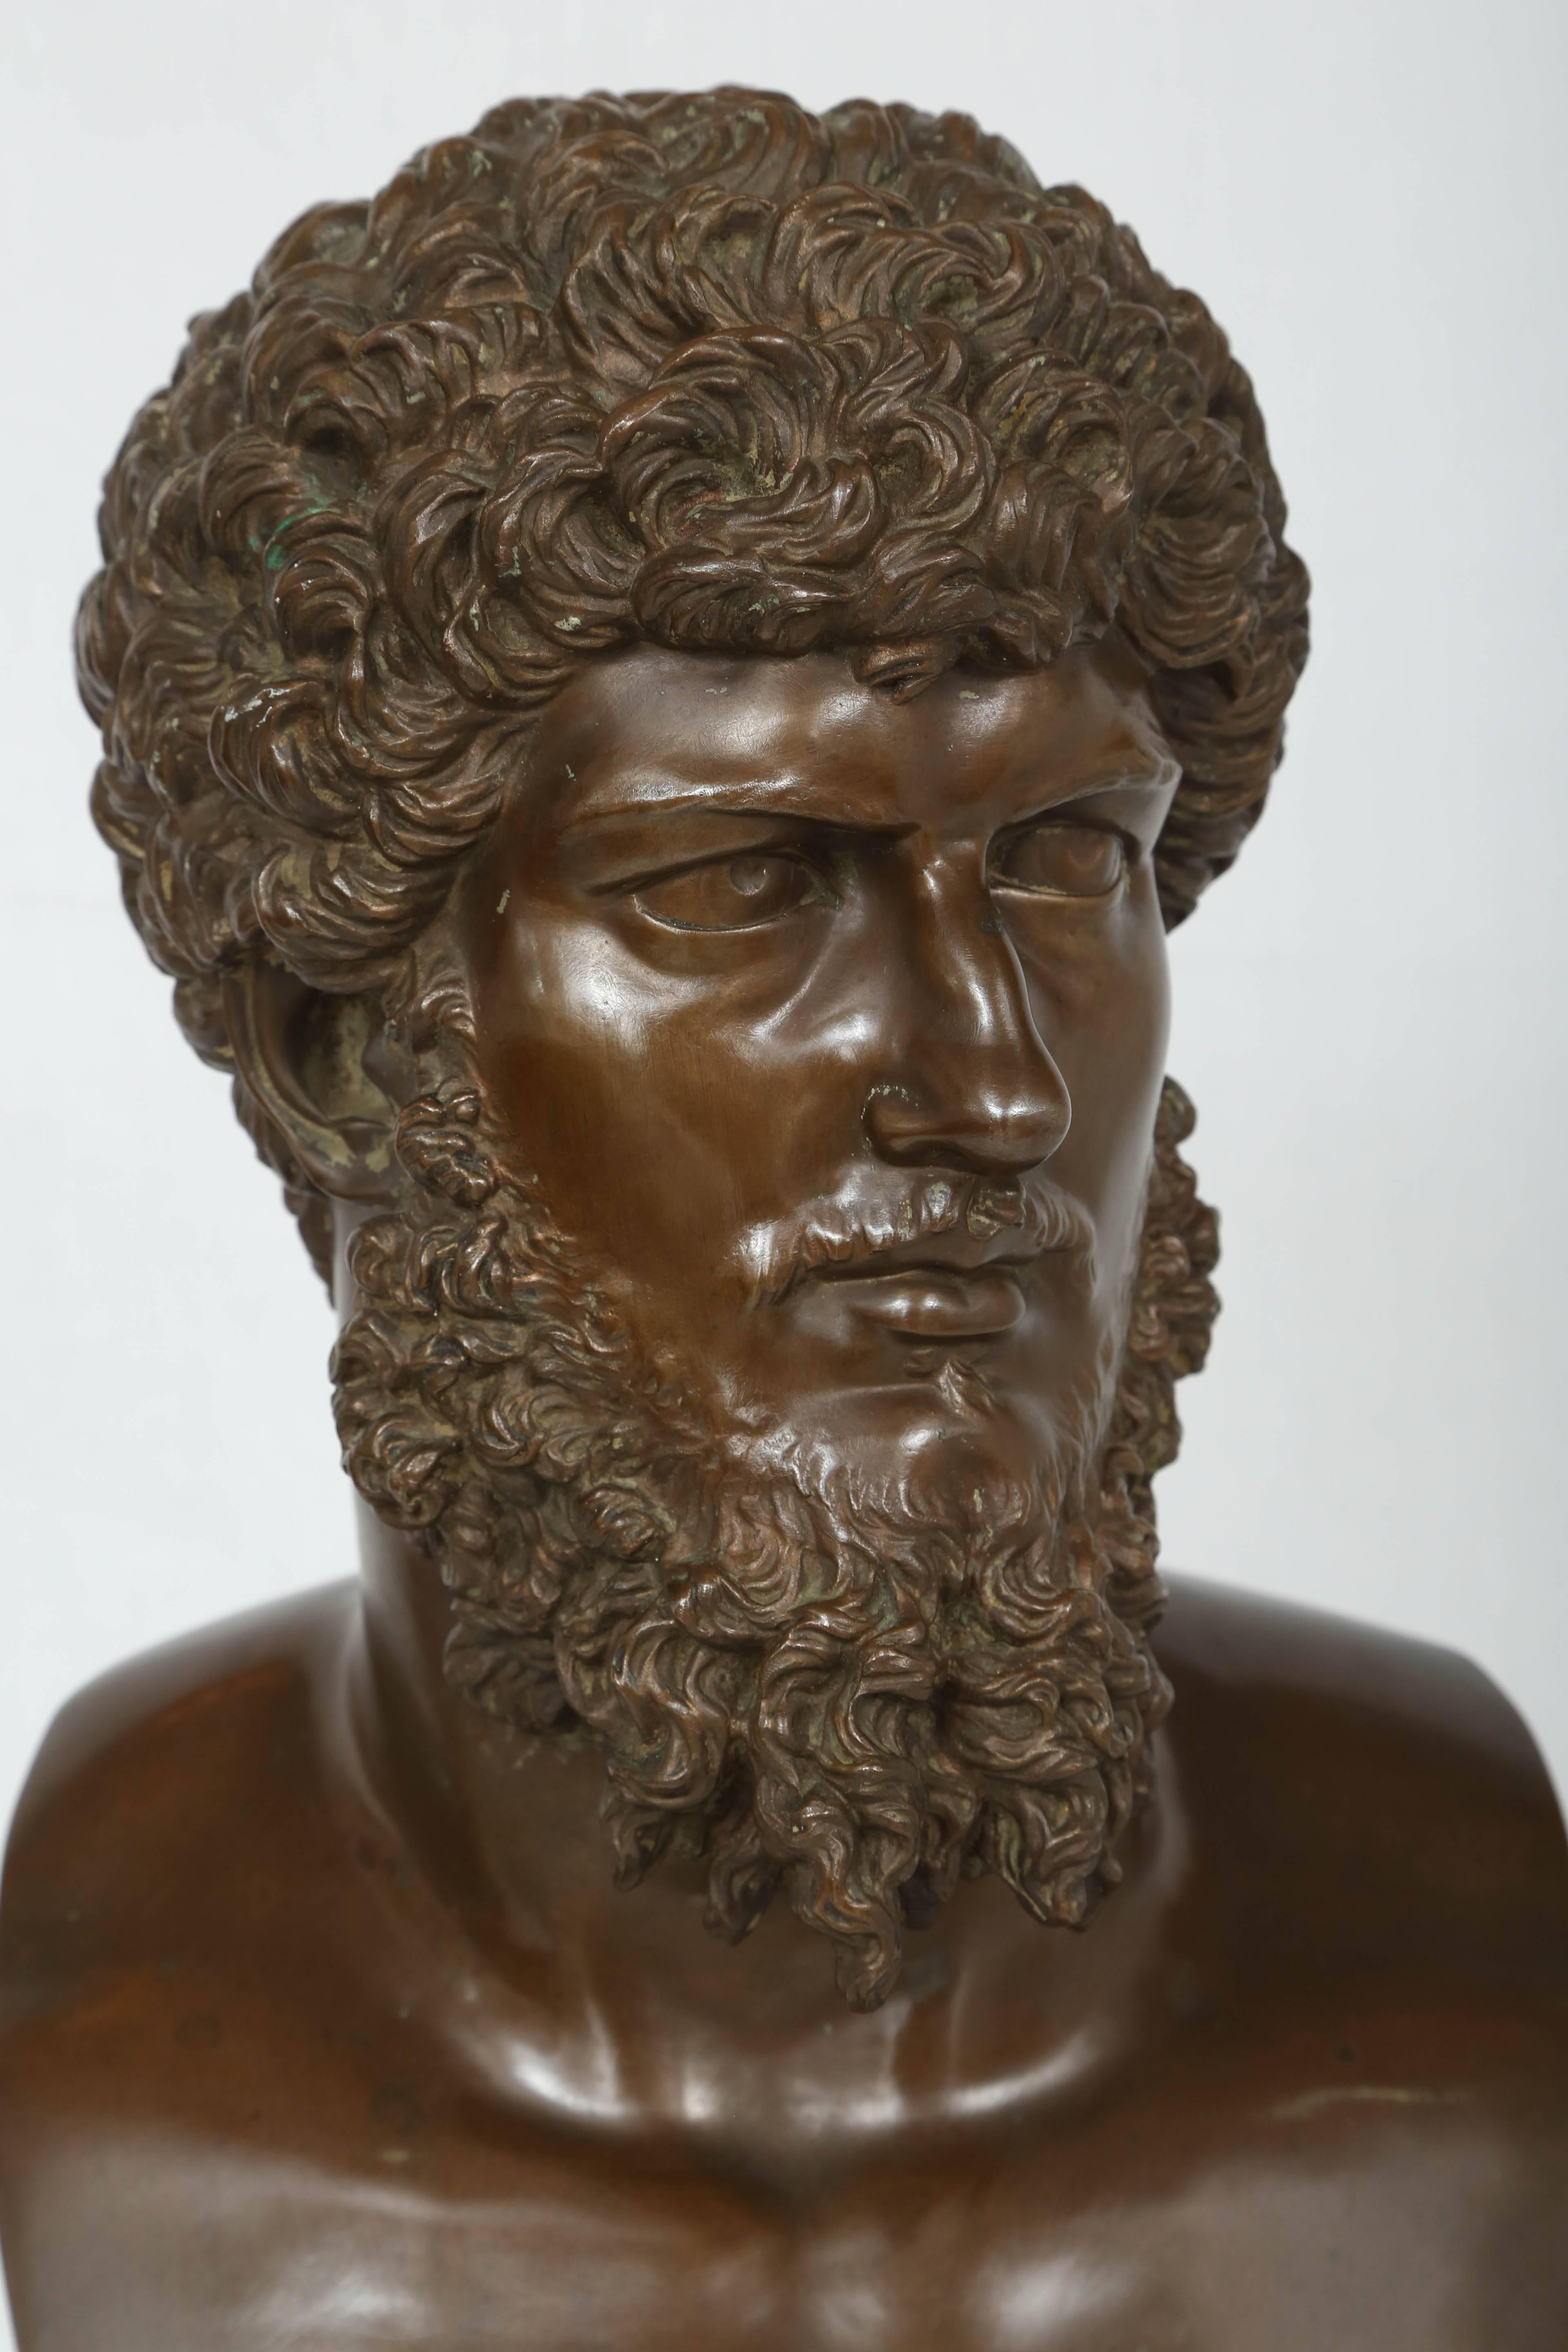 This 19th century bronze bust is a F. Barbadienne foundry casting of the original bust of the Roman Emperor Lucius Verus is located in the Musee Louvre in Paris.

Ferdinand Barbedienne (6 August 1810 – 21 March 1892) was a French metalworker and